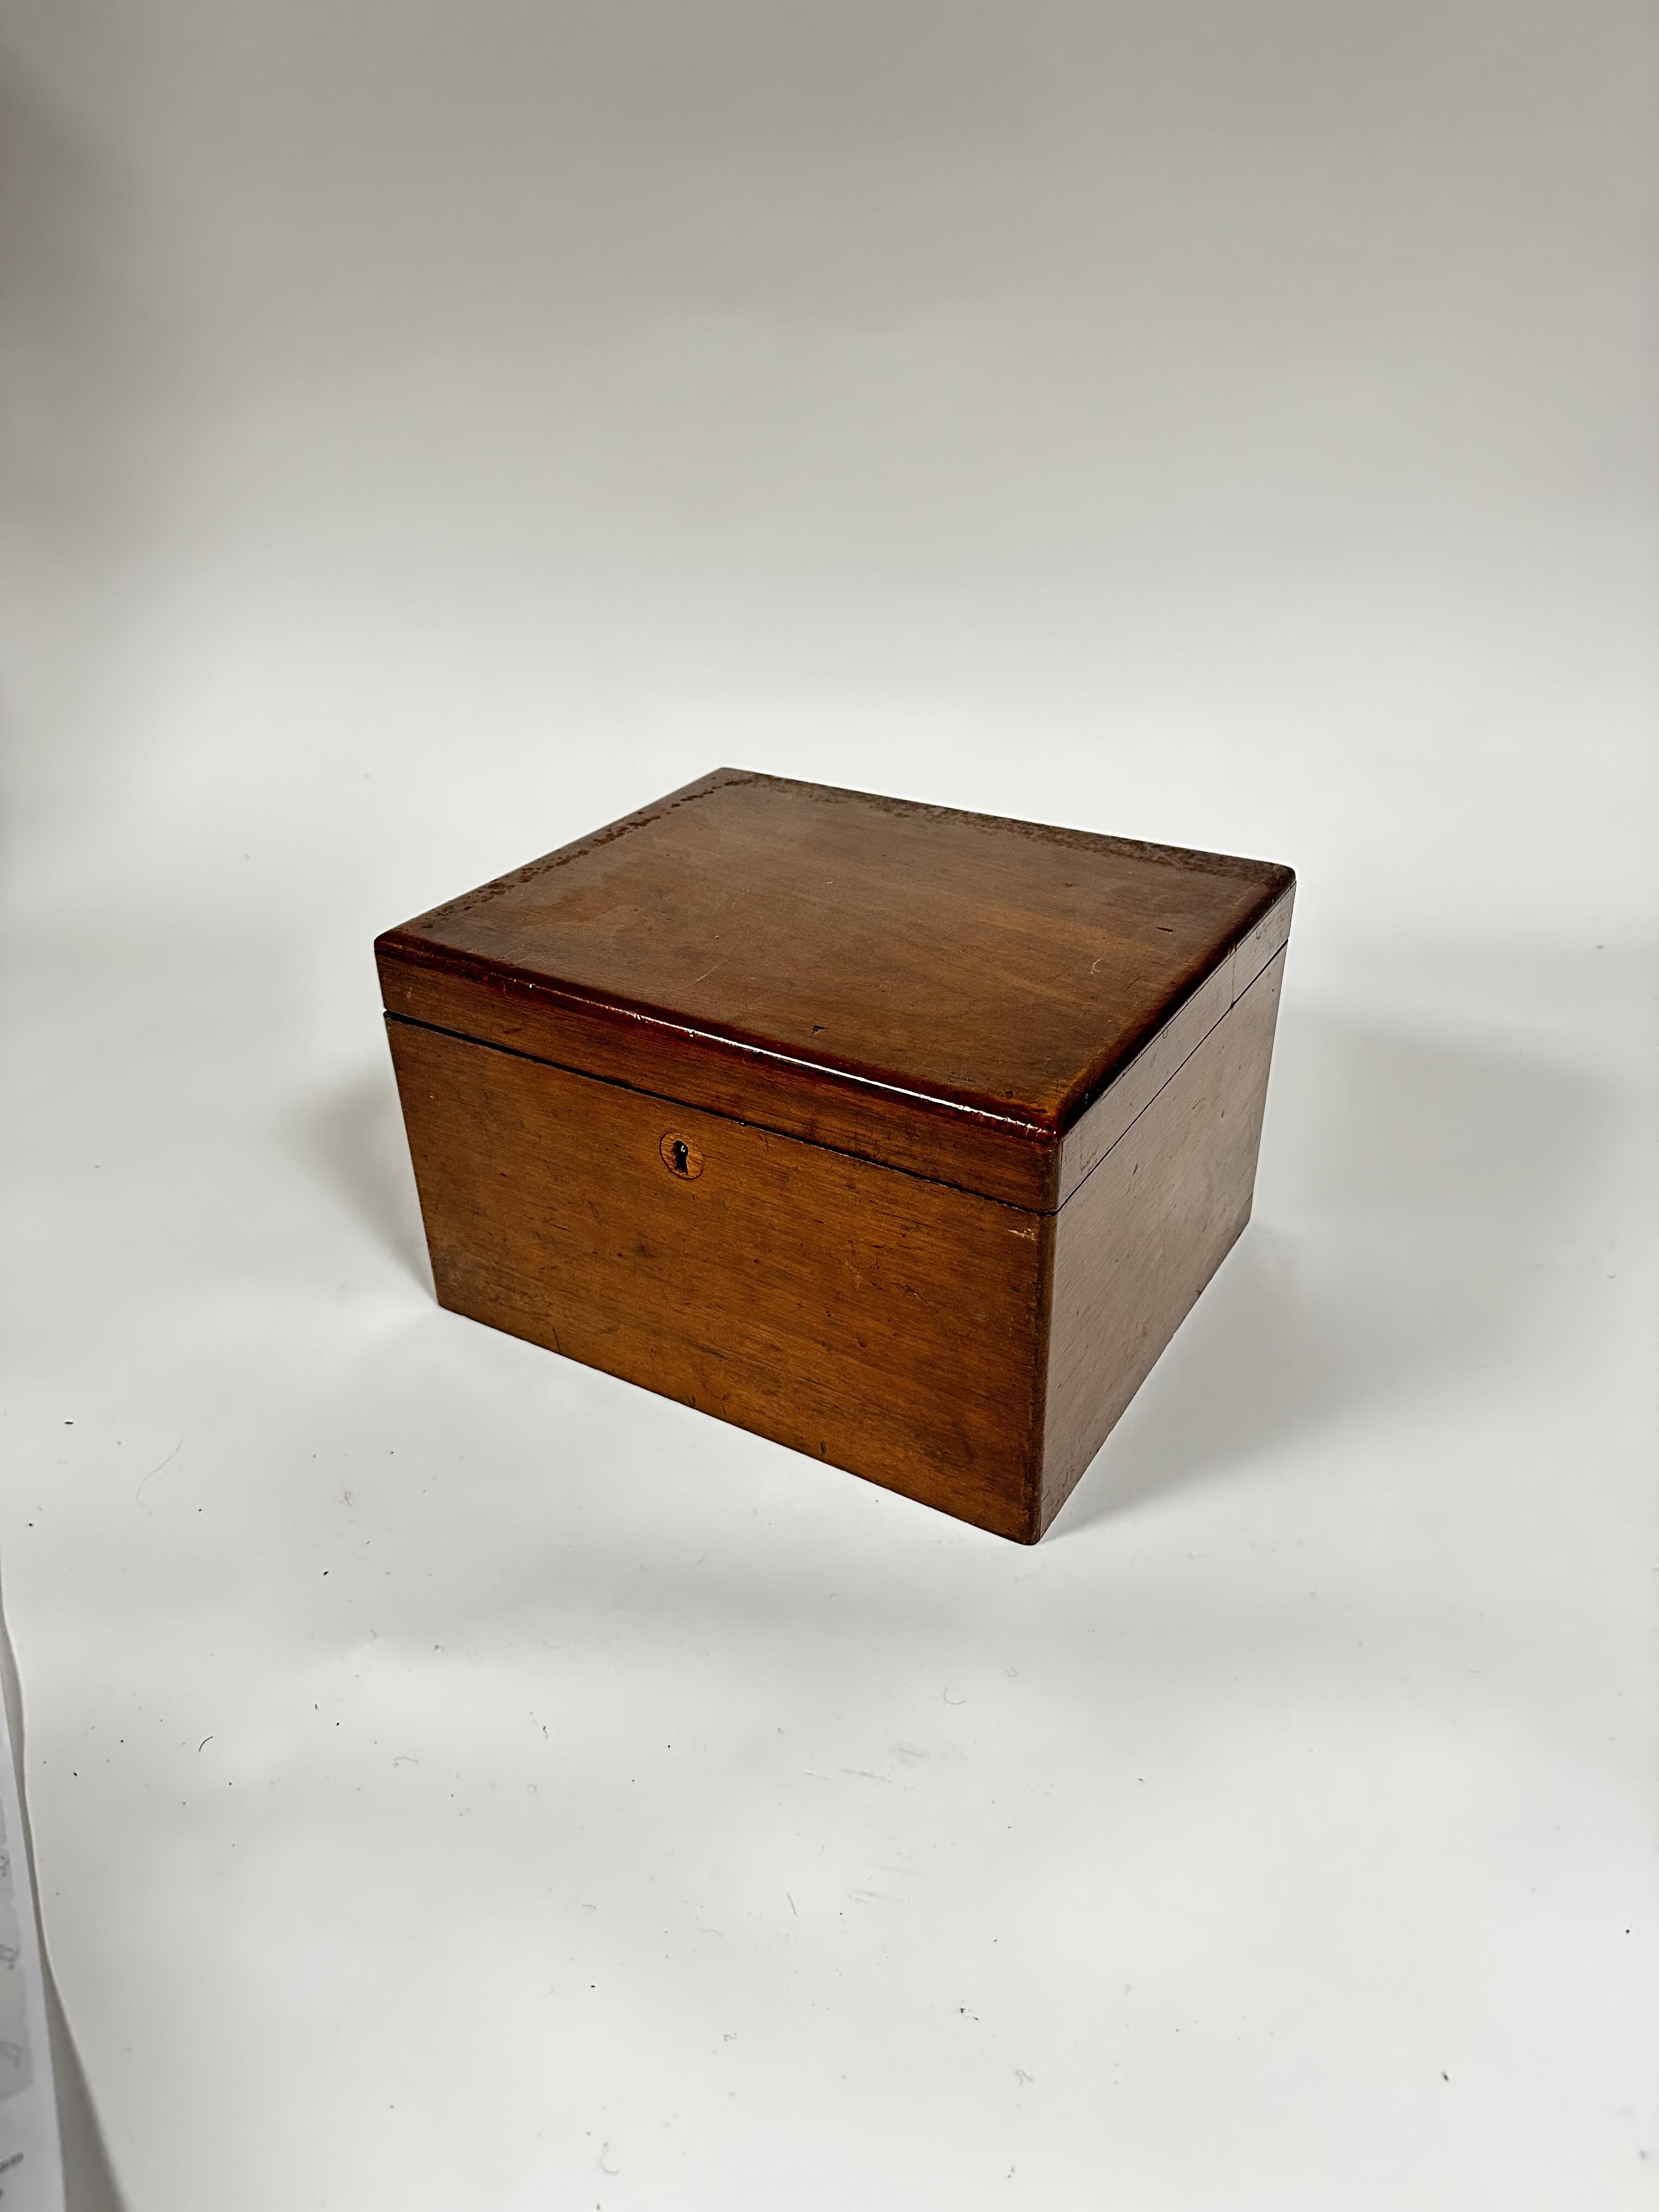 An Edwardian mahogany box, the rectangular top with moulded edge enclosing a plain interior, (18cm x